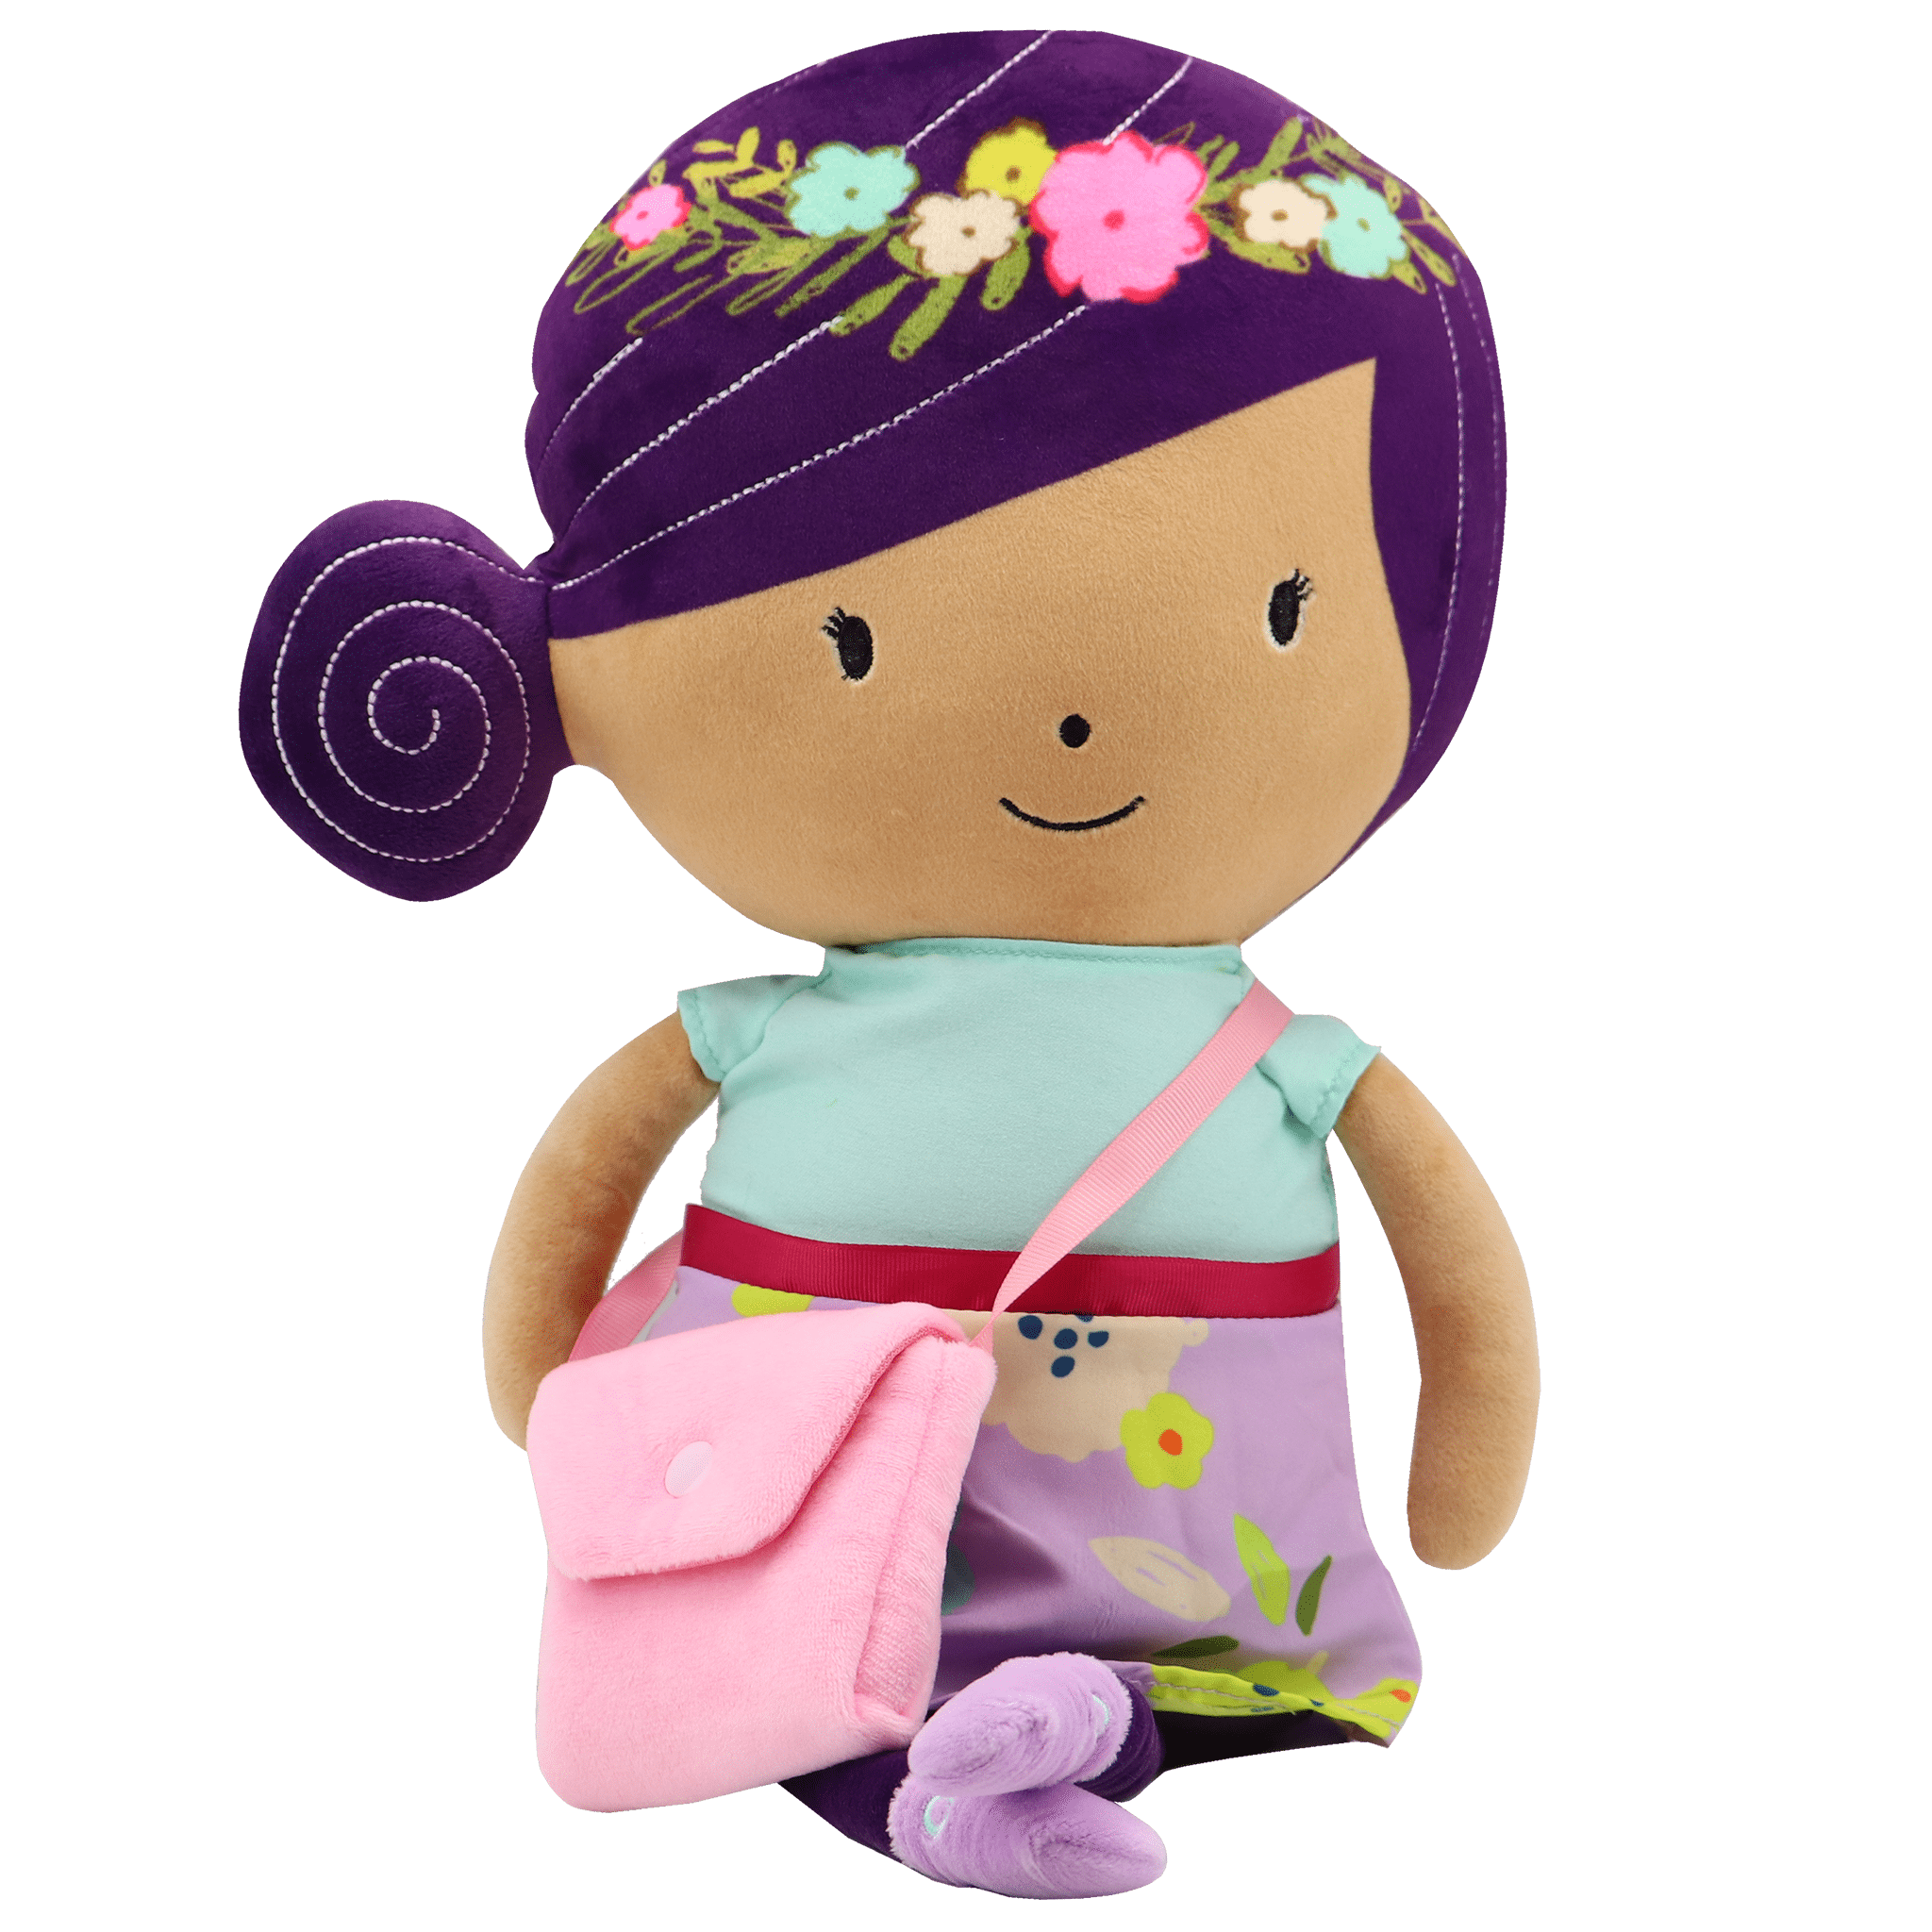 Parker The Woodland Princess Plush Doll: Inspired By The Book "the Forest Of Whimsical Wonder"